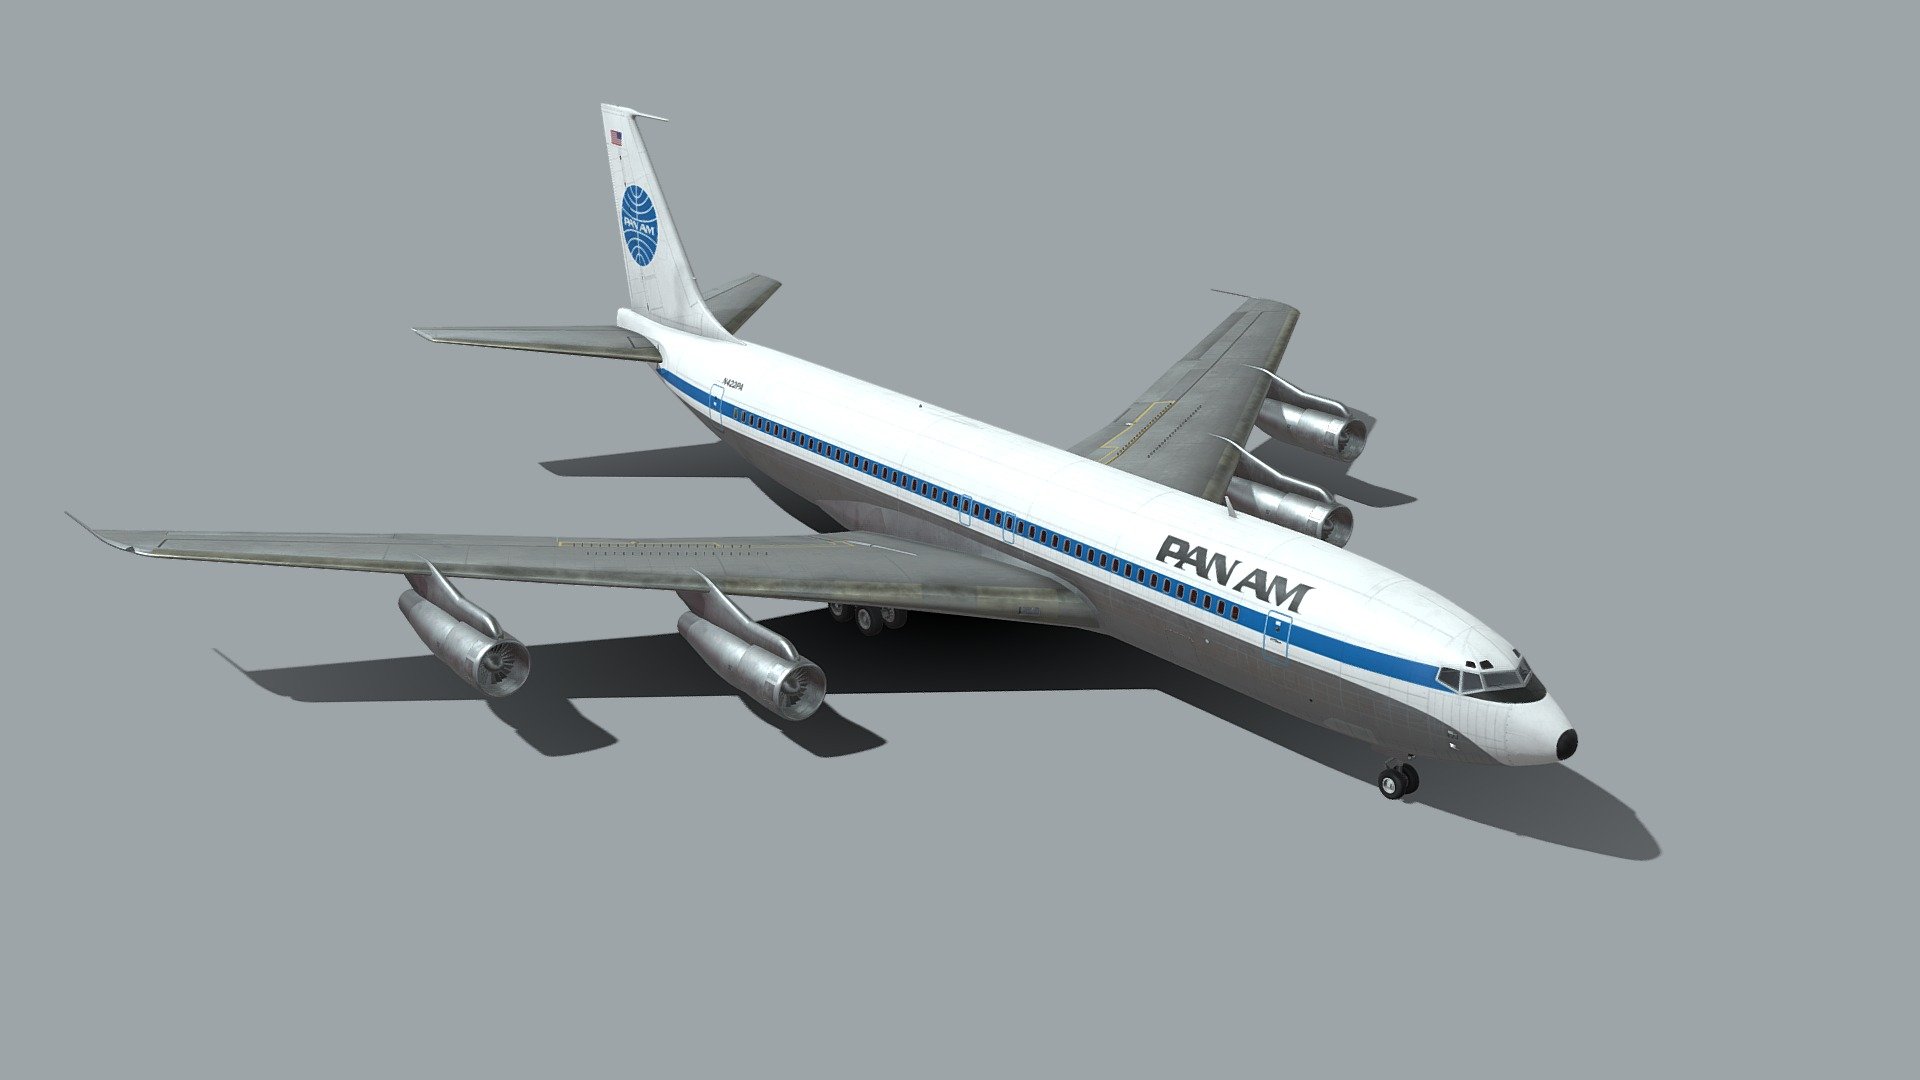 Purchase link is here https://www.artstation.com/artwork/4Xvdak

The Boeing 707 is an American long-range narrow-body airliner that was developed and produced by Boeing Commercial Airplanes, its first jetliner. Developed from the Boeing 367-80, a prototype first flown in 1954, the initial 707-120 first flew on December 20, 1957. Pan American World Airways began regular 707 service on October 26, 1958. The airplane was built until 1979. A quadjet, the 707 has a swept wing with podded engines. Its larger fuselage cross-section allowed six-abreast economy seating, retained in the later 720, 727, 737, and 757.

Although it was not the first commercial jetliner in service, the 707 was the first to be widespread and is often credited with beginning the Jet Age It dominated passenger air transport in the 1960s, and remained common through the 1970s, on domestic, transcontinental, and transatlantic flights, as well as cargo and military applications 3d model